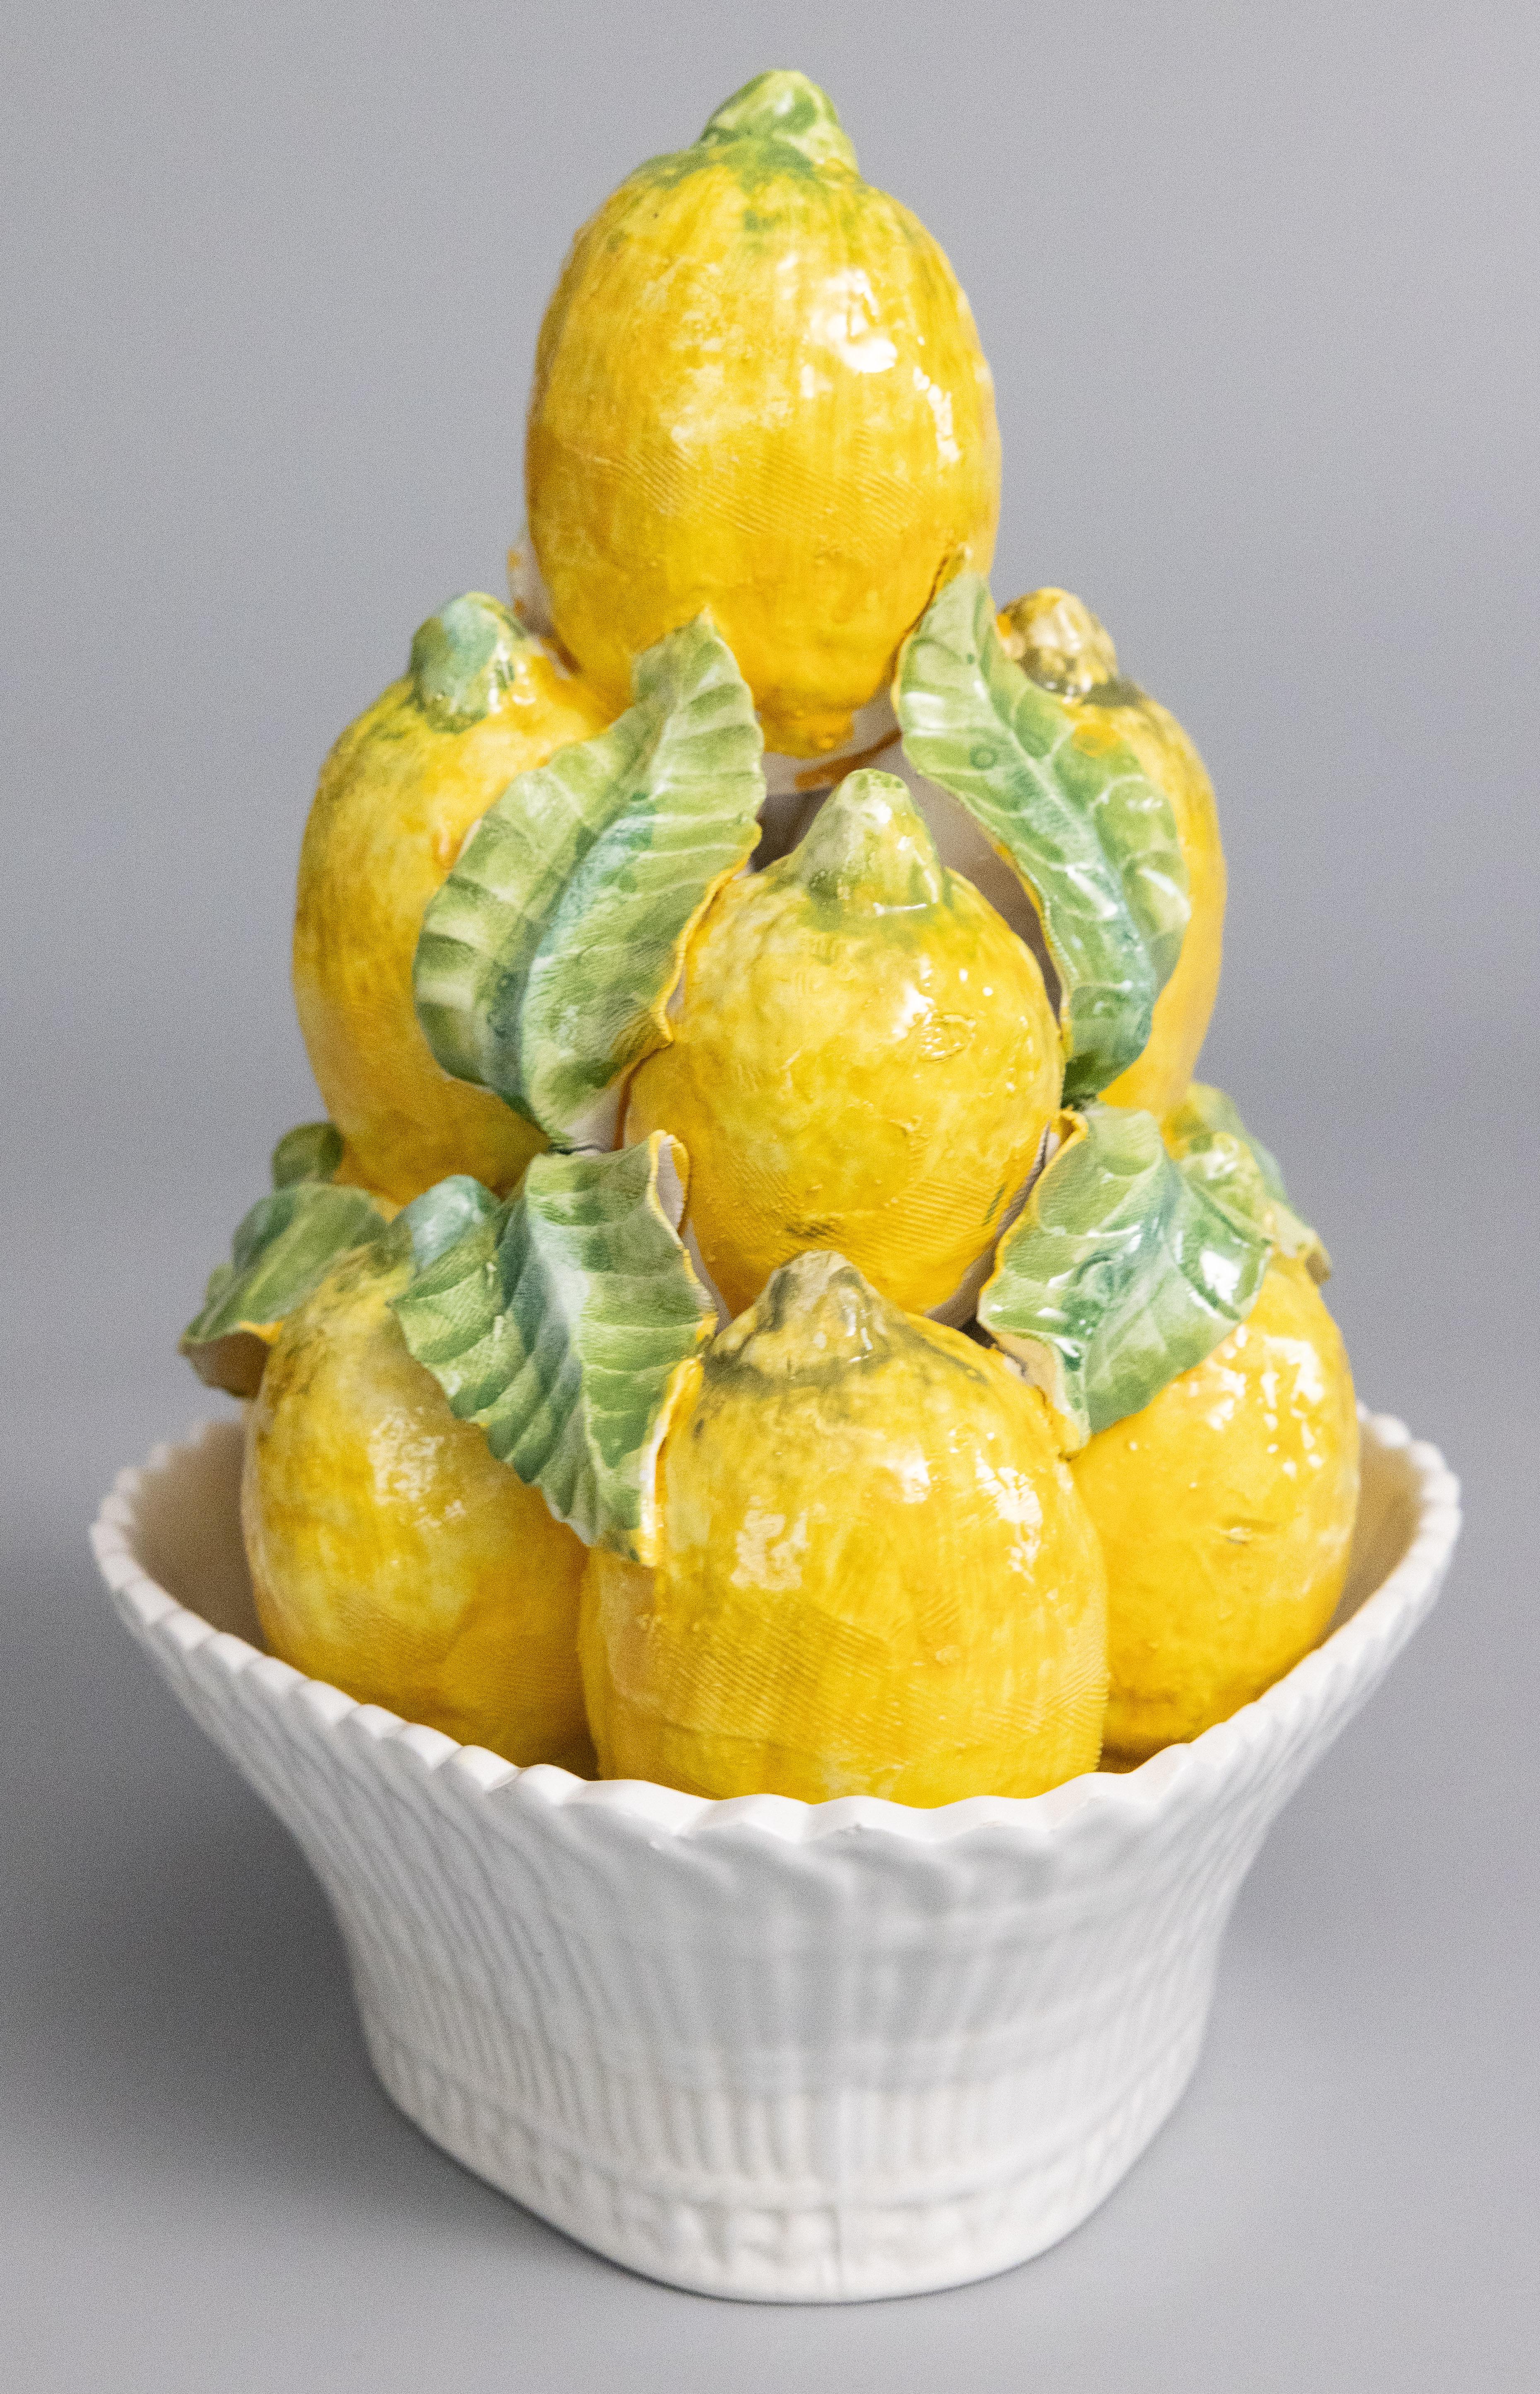 A lovely Mid-Century Italian majolica basket of lemons topiary centerpiece. Freshen up your kitchen or breakfast room with this charming hand painted arrangement of lemons accented by vibrant green leaves in a white latticework